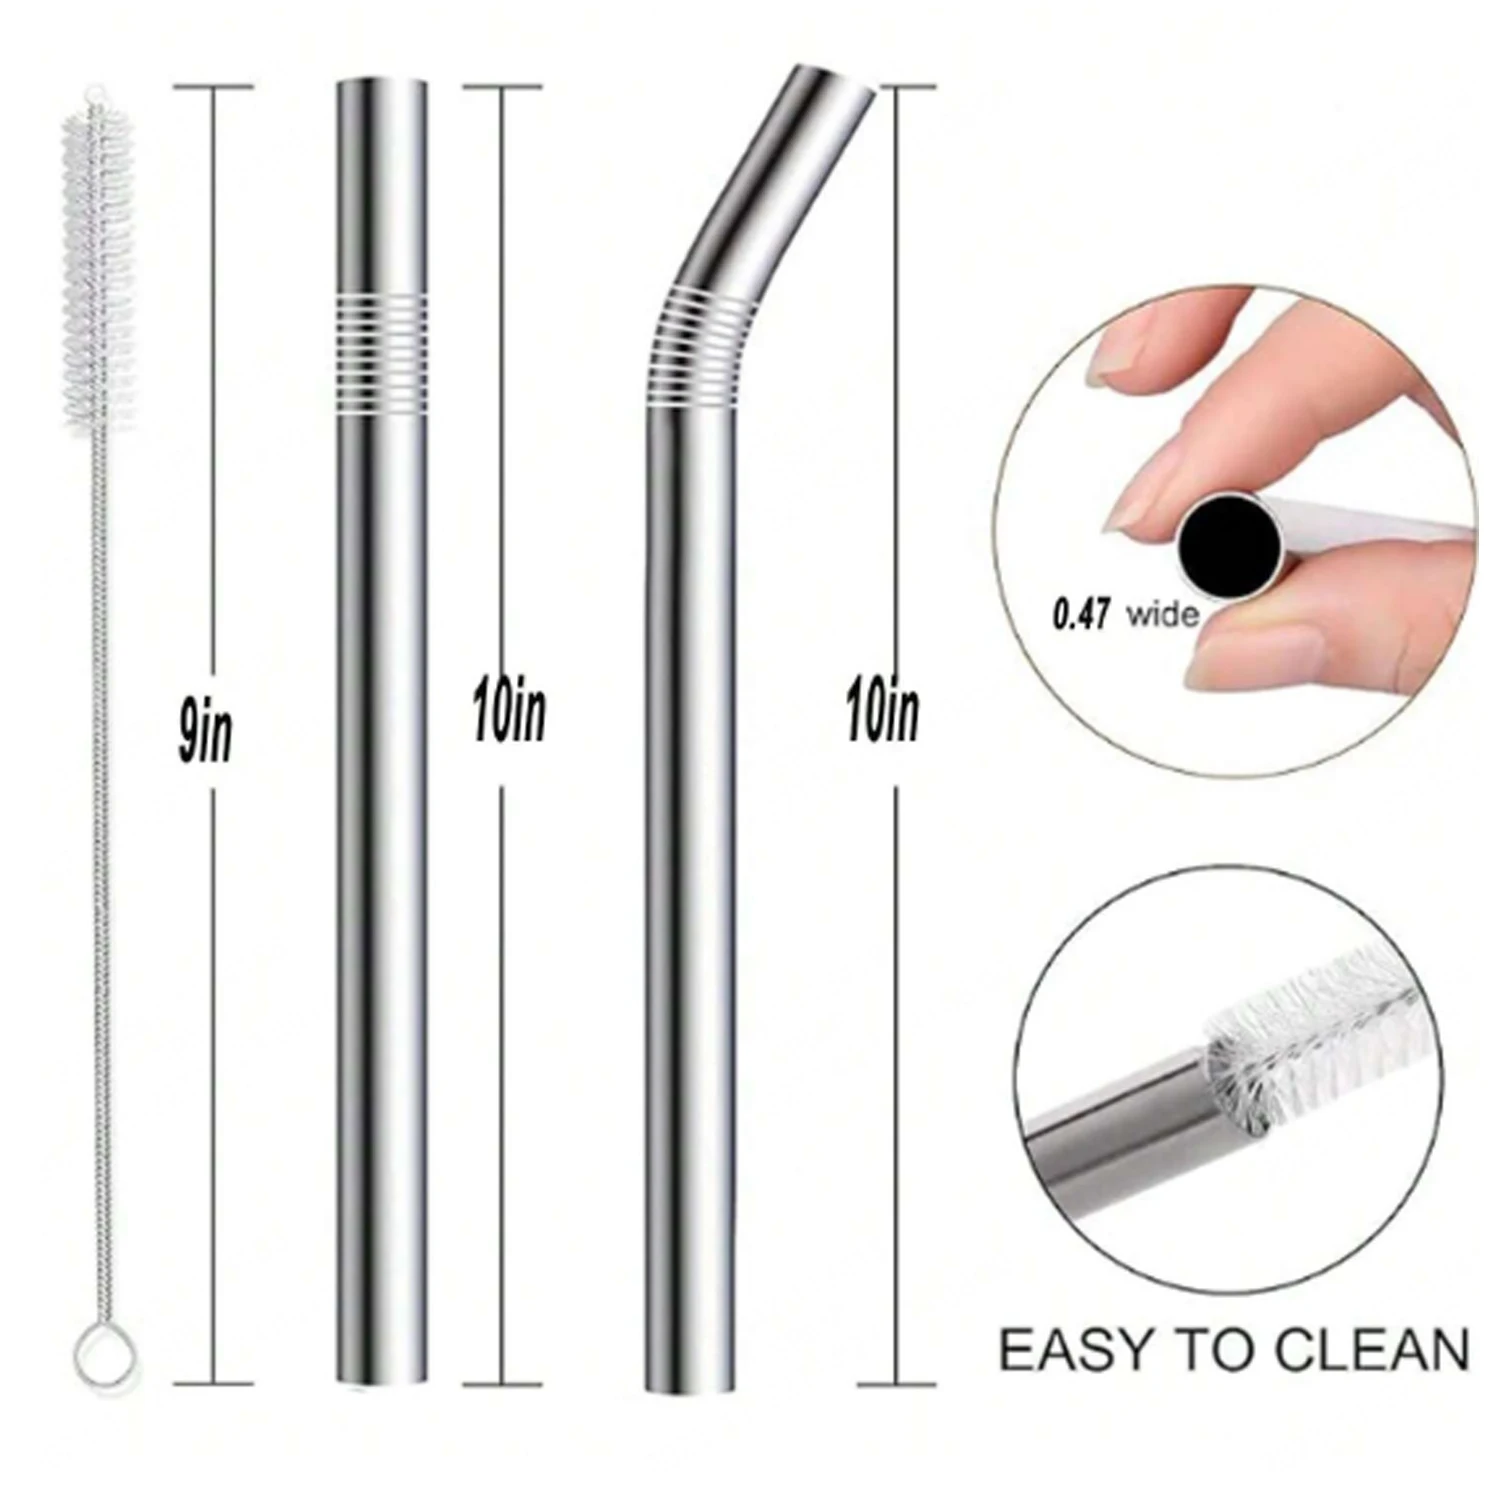 4PCS Stainless Steel Smoothie Straws, Extra Wide Reusable Metal Drinking Straws for Milkshake, Smoothie with 1 Cleaning Brush